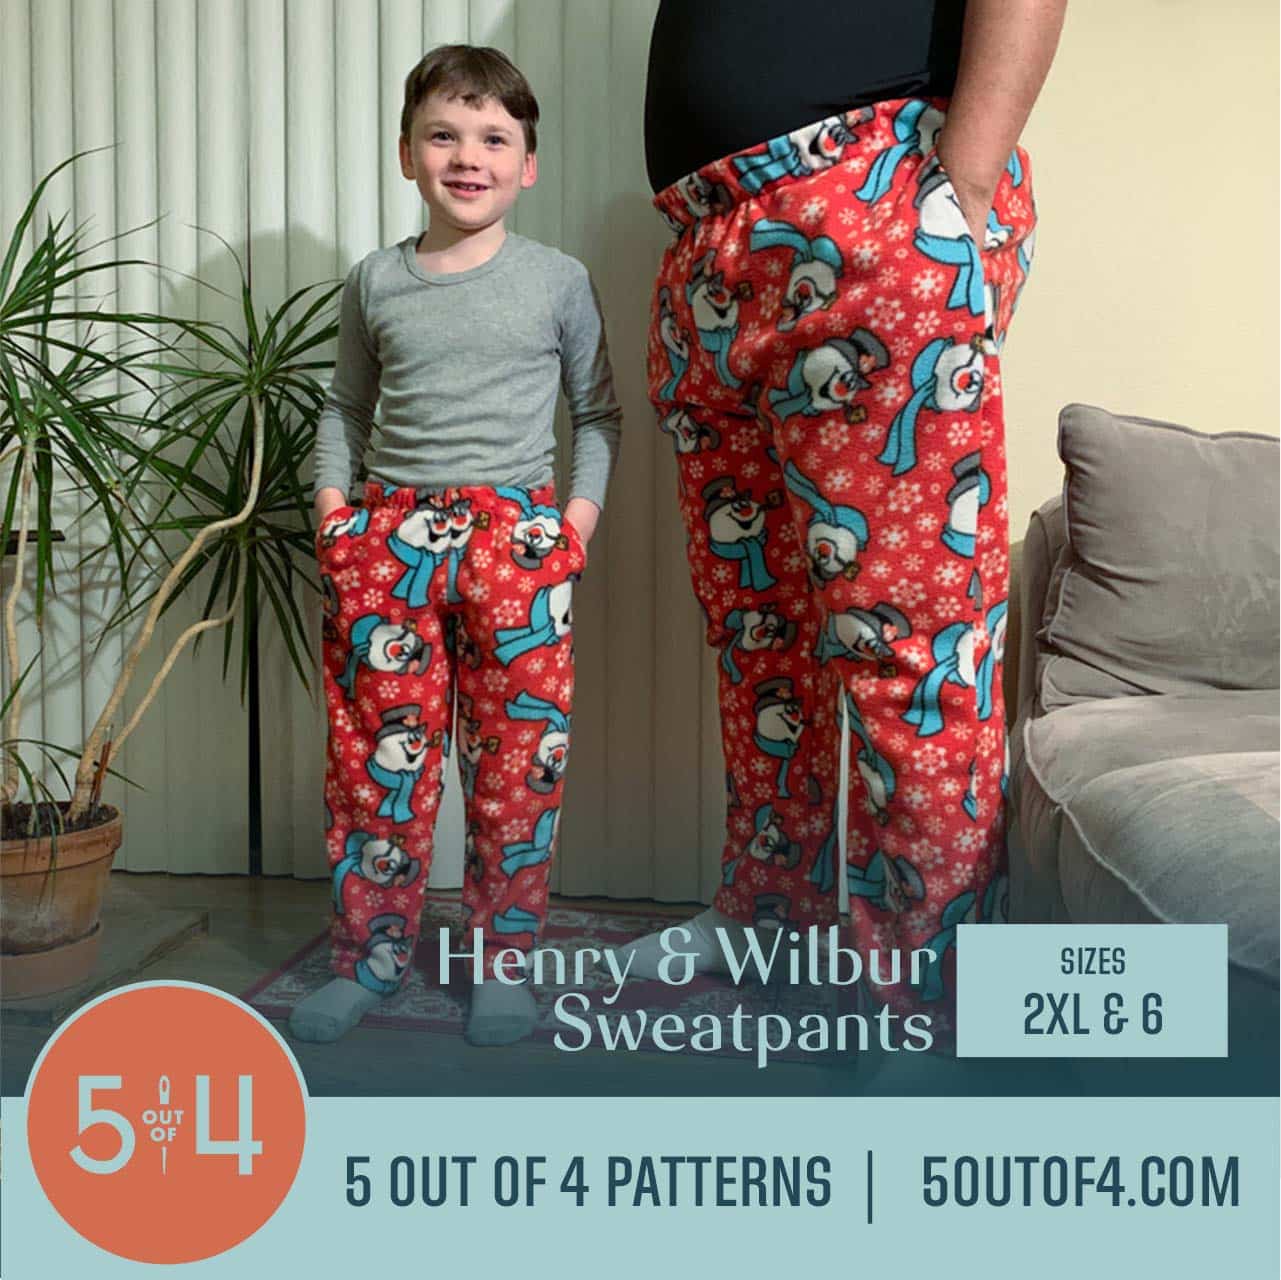 Henry and Wilbur Sweatpants - 5 out of 4 Patterns